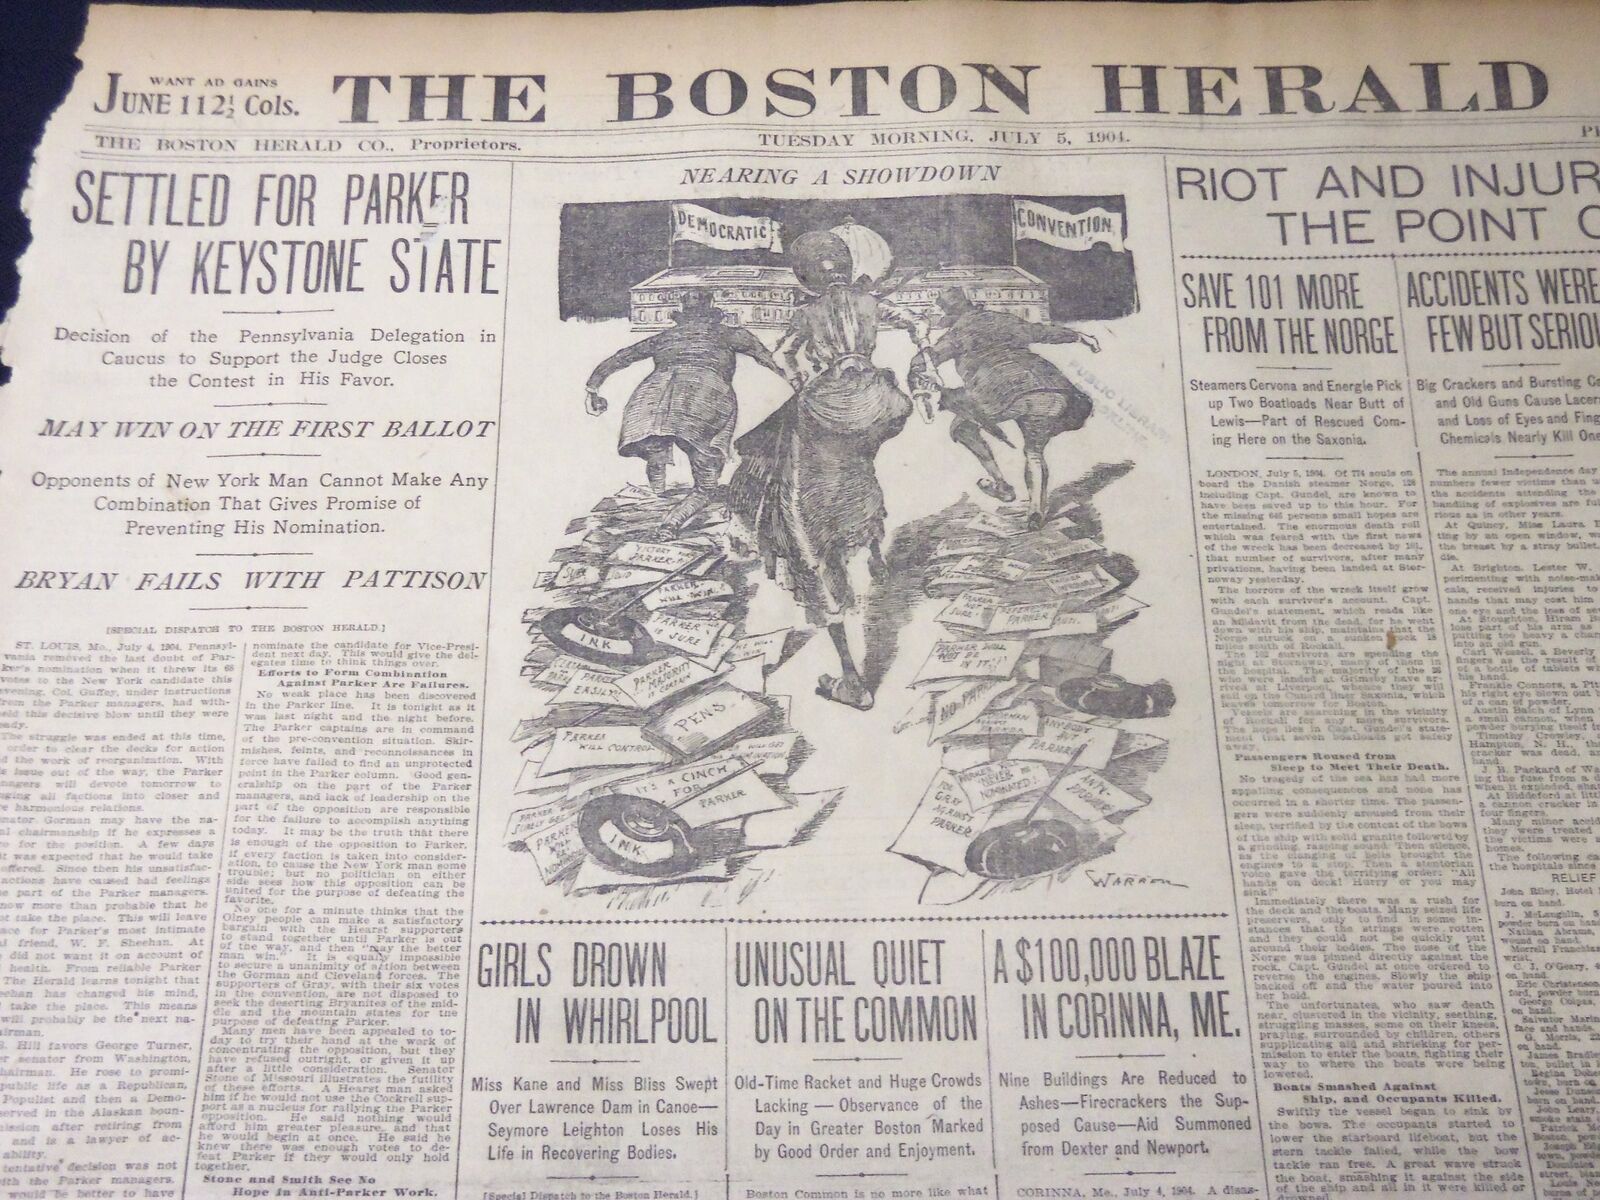 1904 JULY 5 THE BOSTON HERALD - SAVE 101 MORE FROM THE NORGE - BH 44